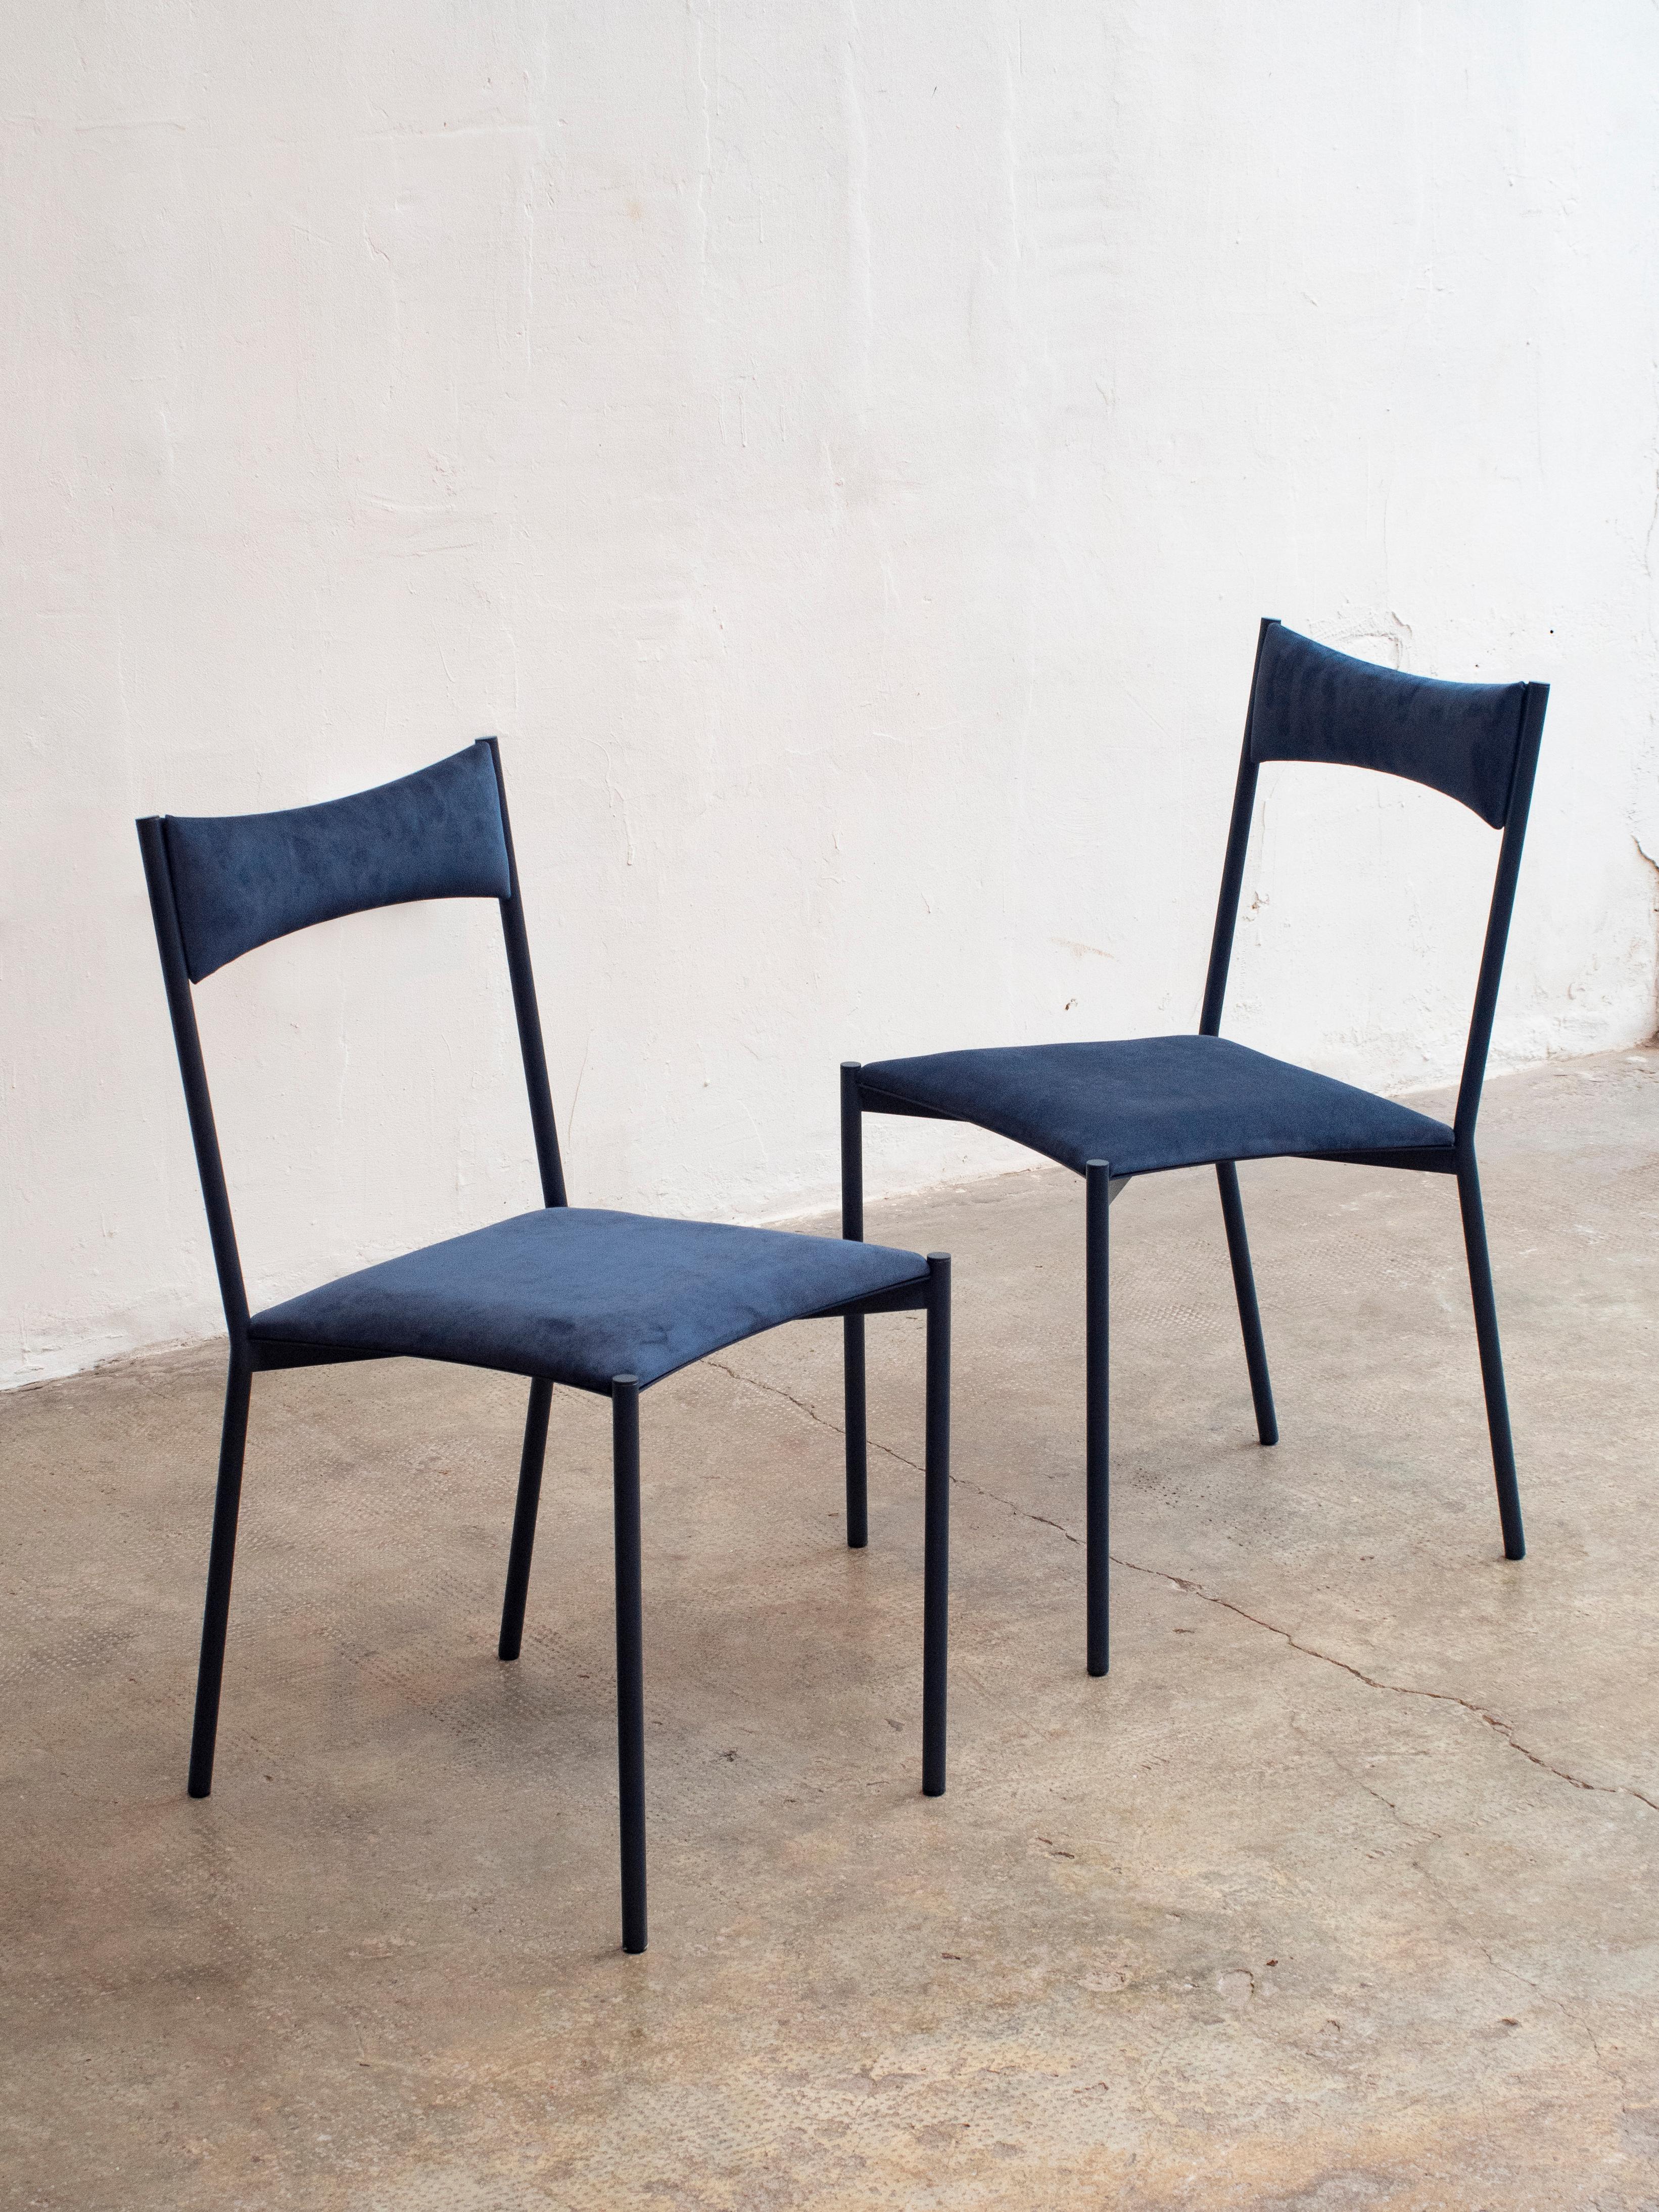 A set of 2 tensa chairs, dark blue by Ries
Dimensions: W 40 x D 49.5 x H 82 cm 
Materials: Round steel tube, laser cut metal sheet, high density foam, velvet upholstery, aluminum/bronze caps
Matte powder coated painting (Finishings)

Also